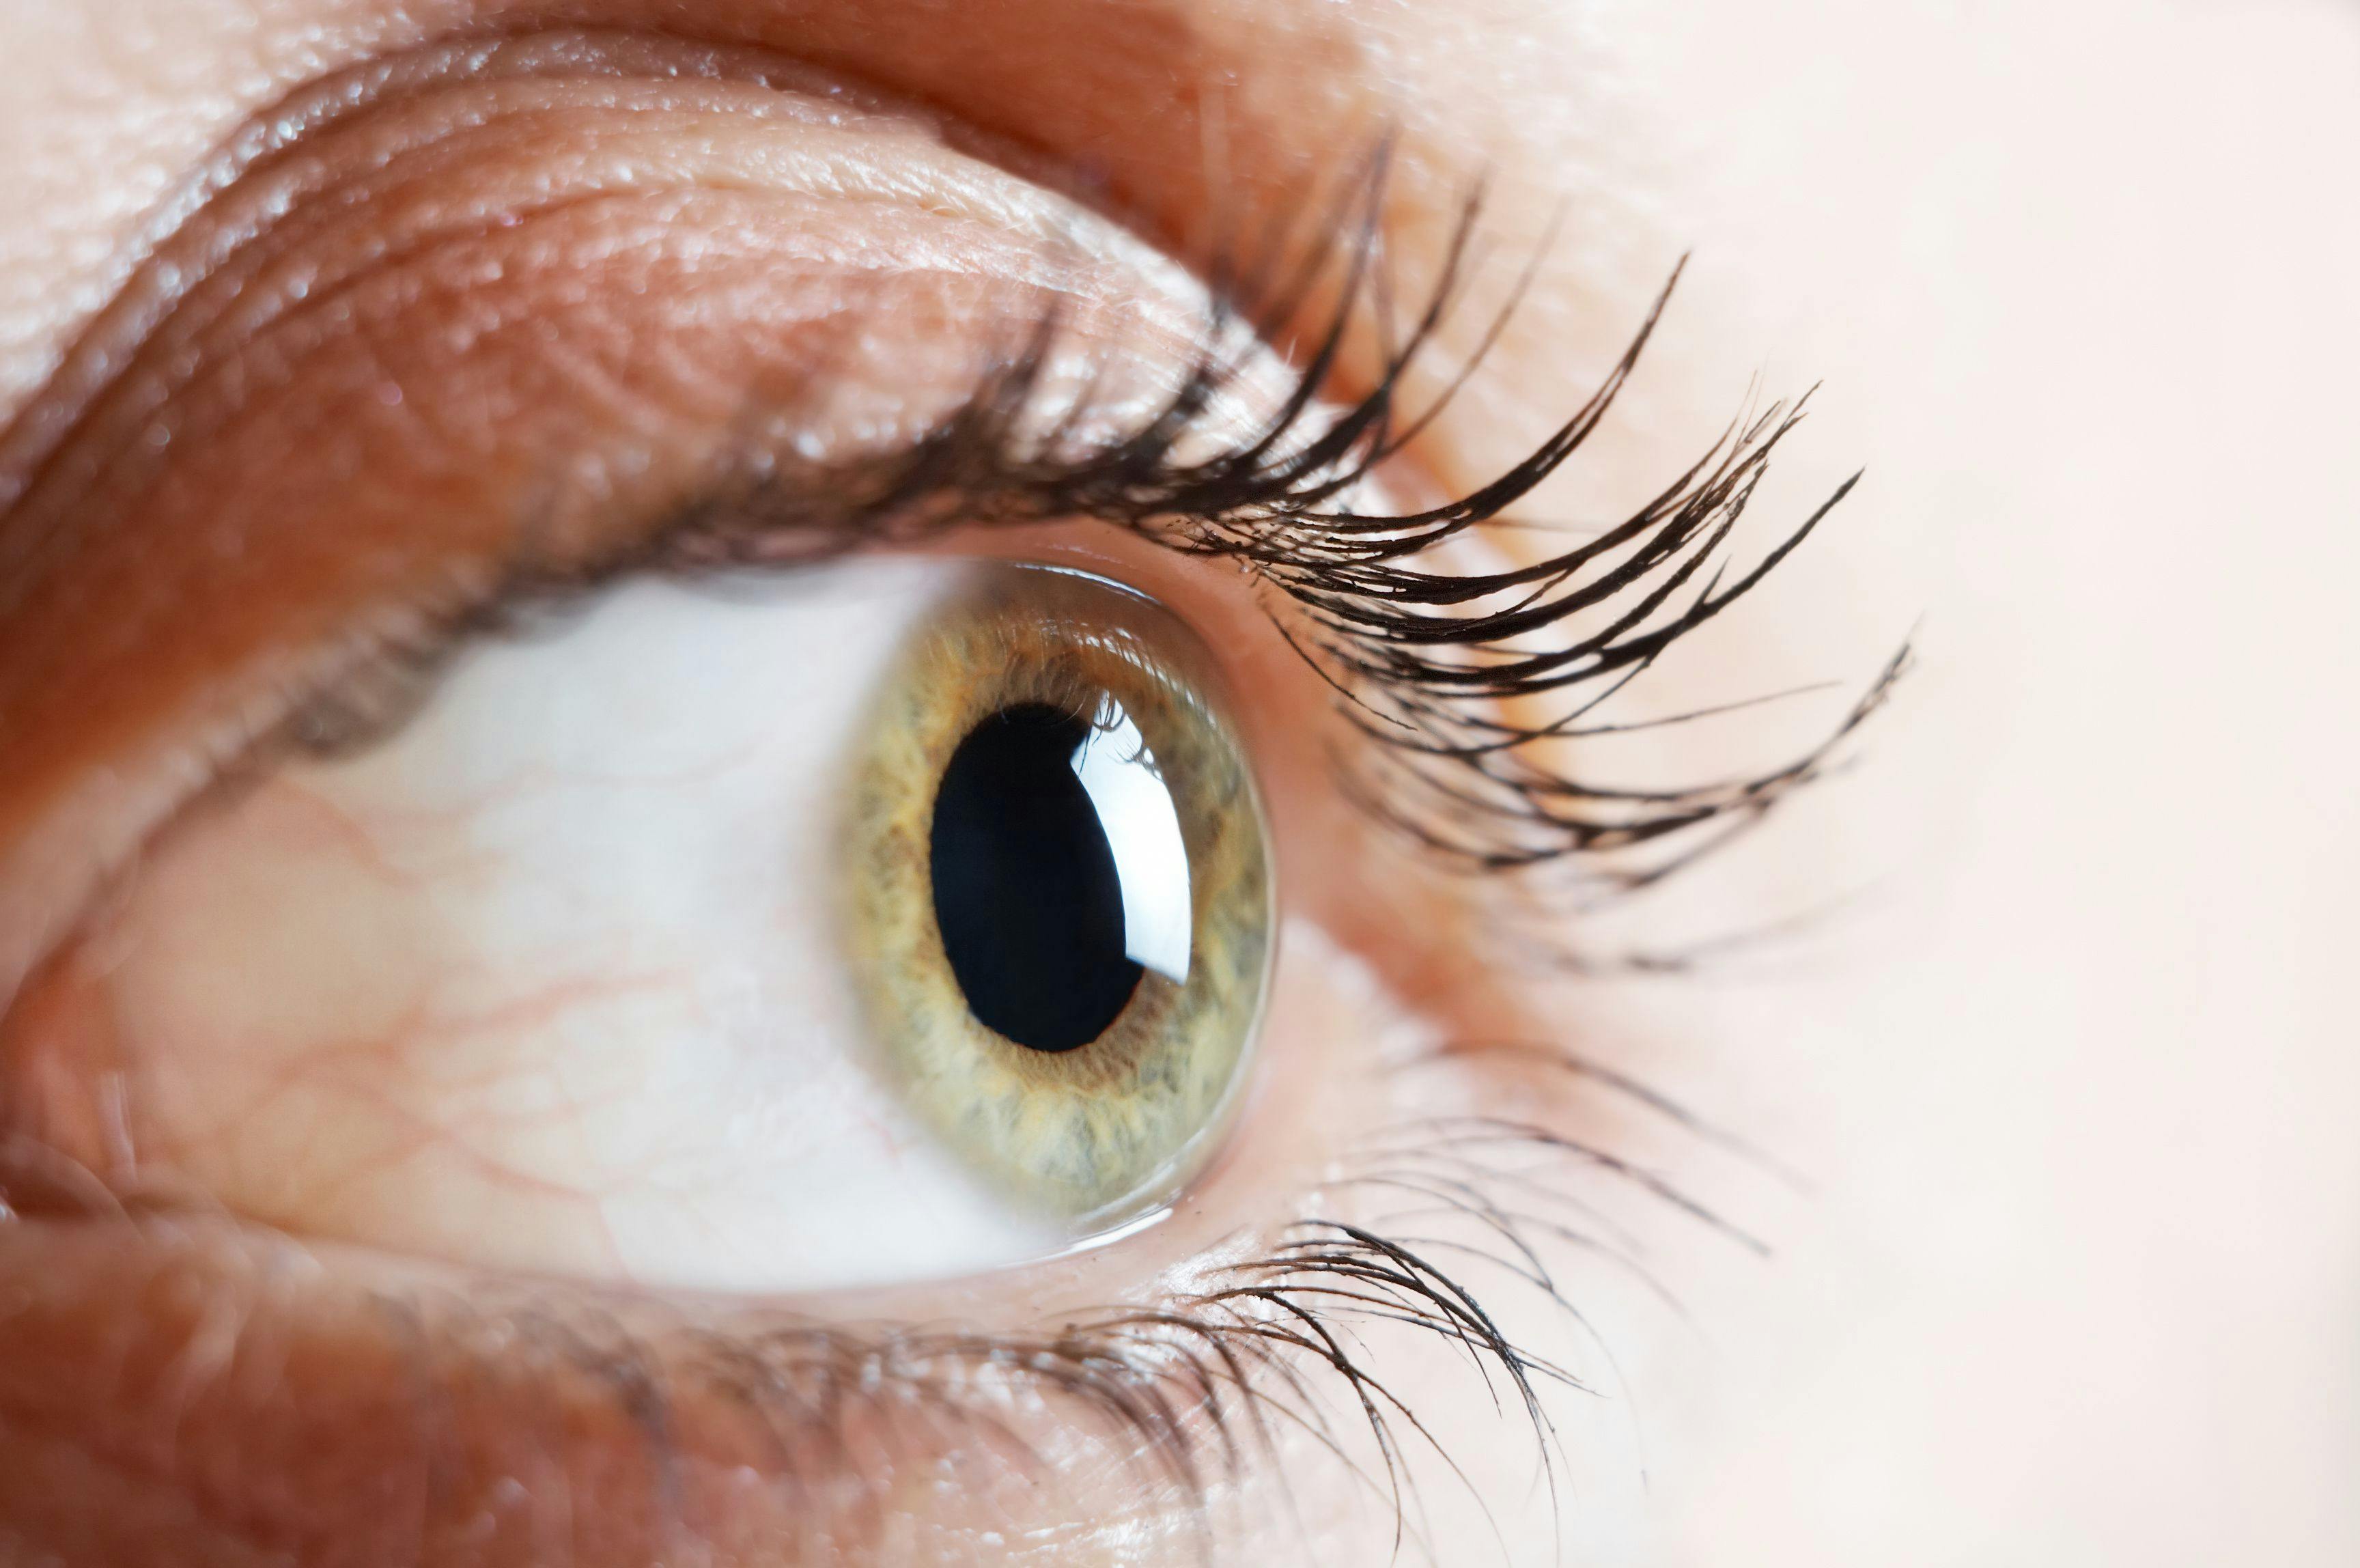 A study was conducted by Pooja Khamar, PhD, FRCS, and colleagues to determine whether enhancing LOX expression in the cornea could benefit patients with a diagnosis of keratoconus. 